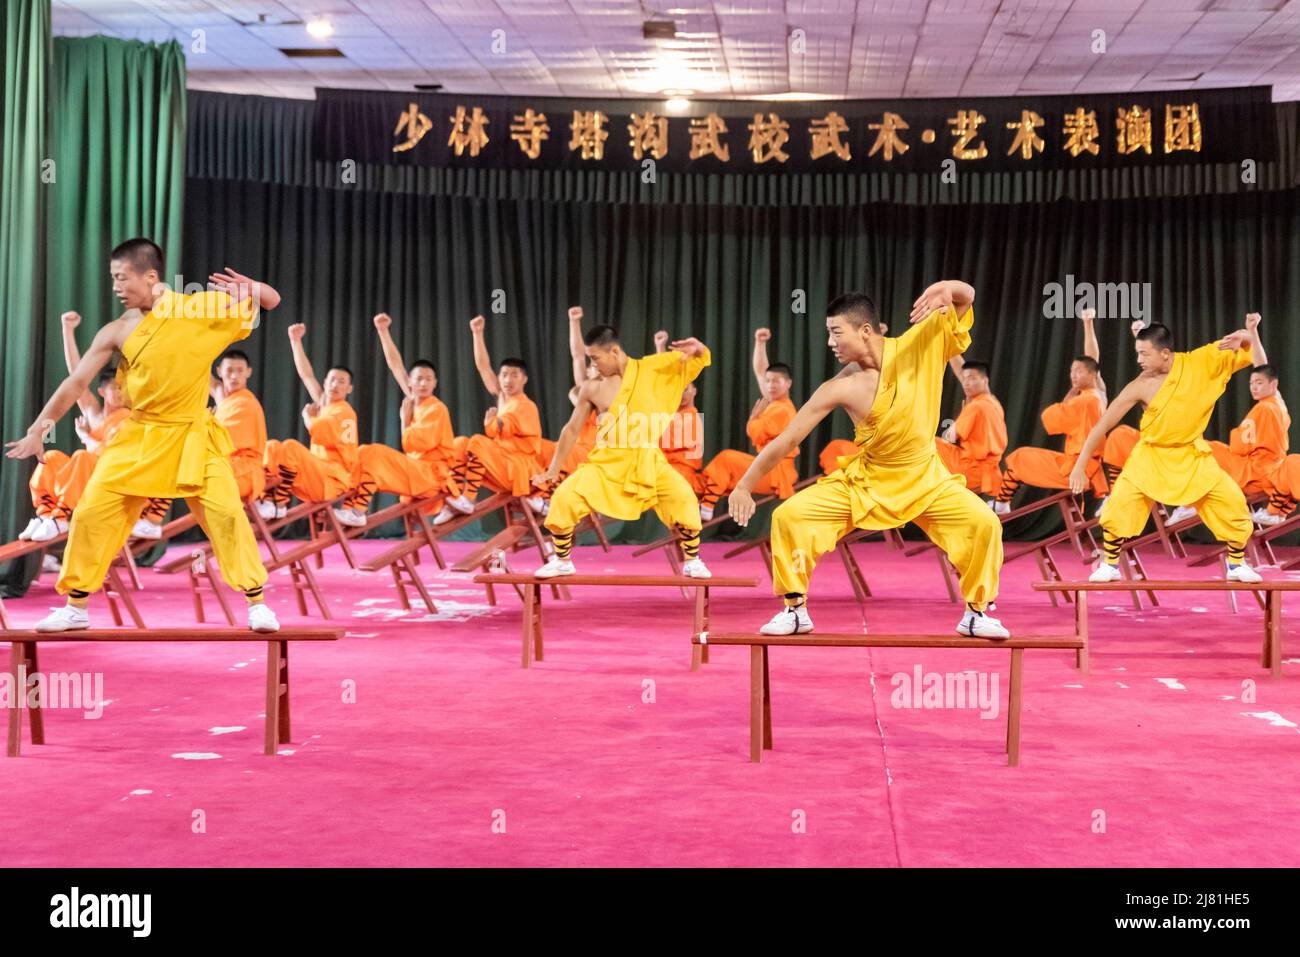 Apprentices at the famous Shaolin Temple at Dengfeng, Henan, China perform their martial arts and acrobatic skills. Stock Photo